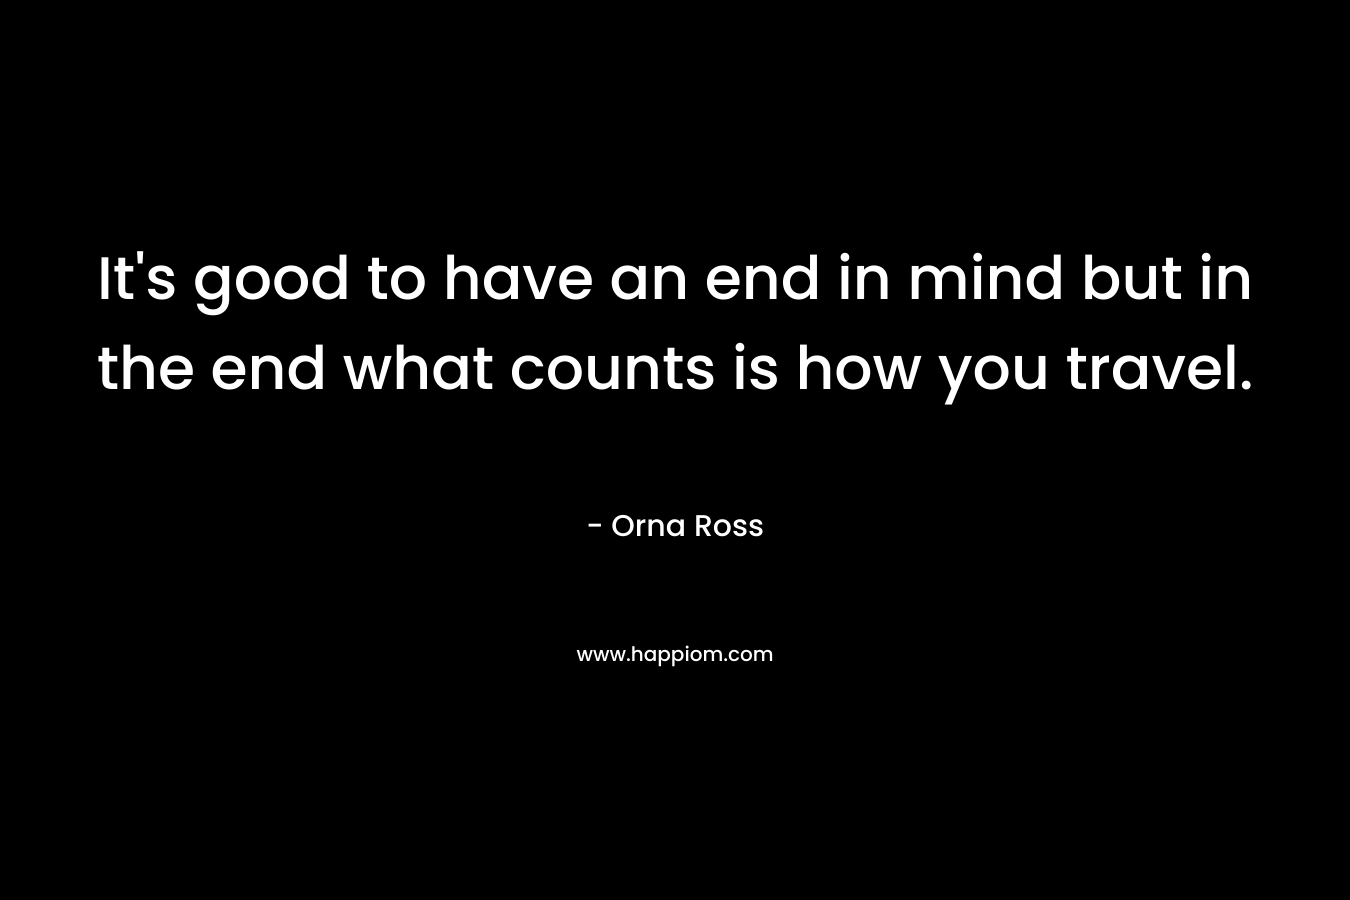 It’s good to have an end in mind but in the end what counts is how you travel. – Orna Ross